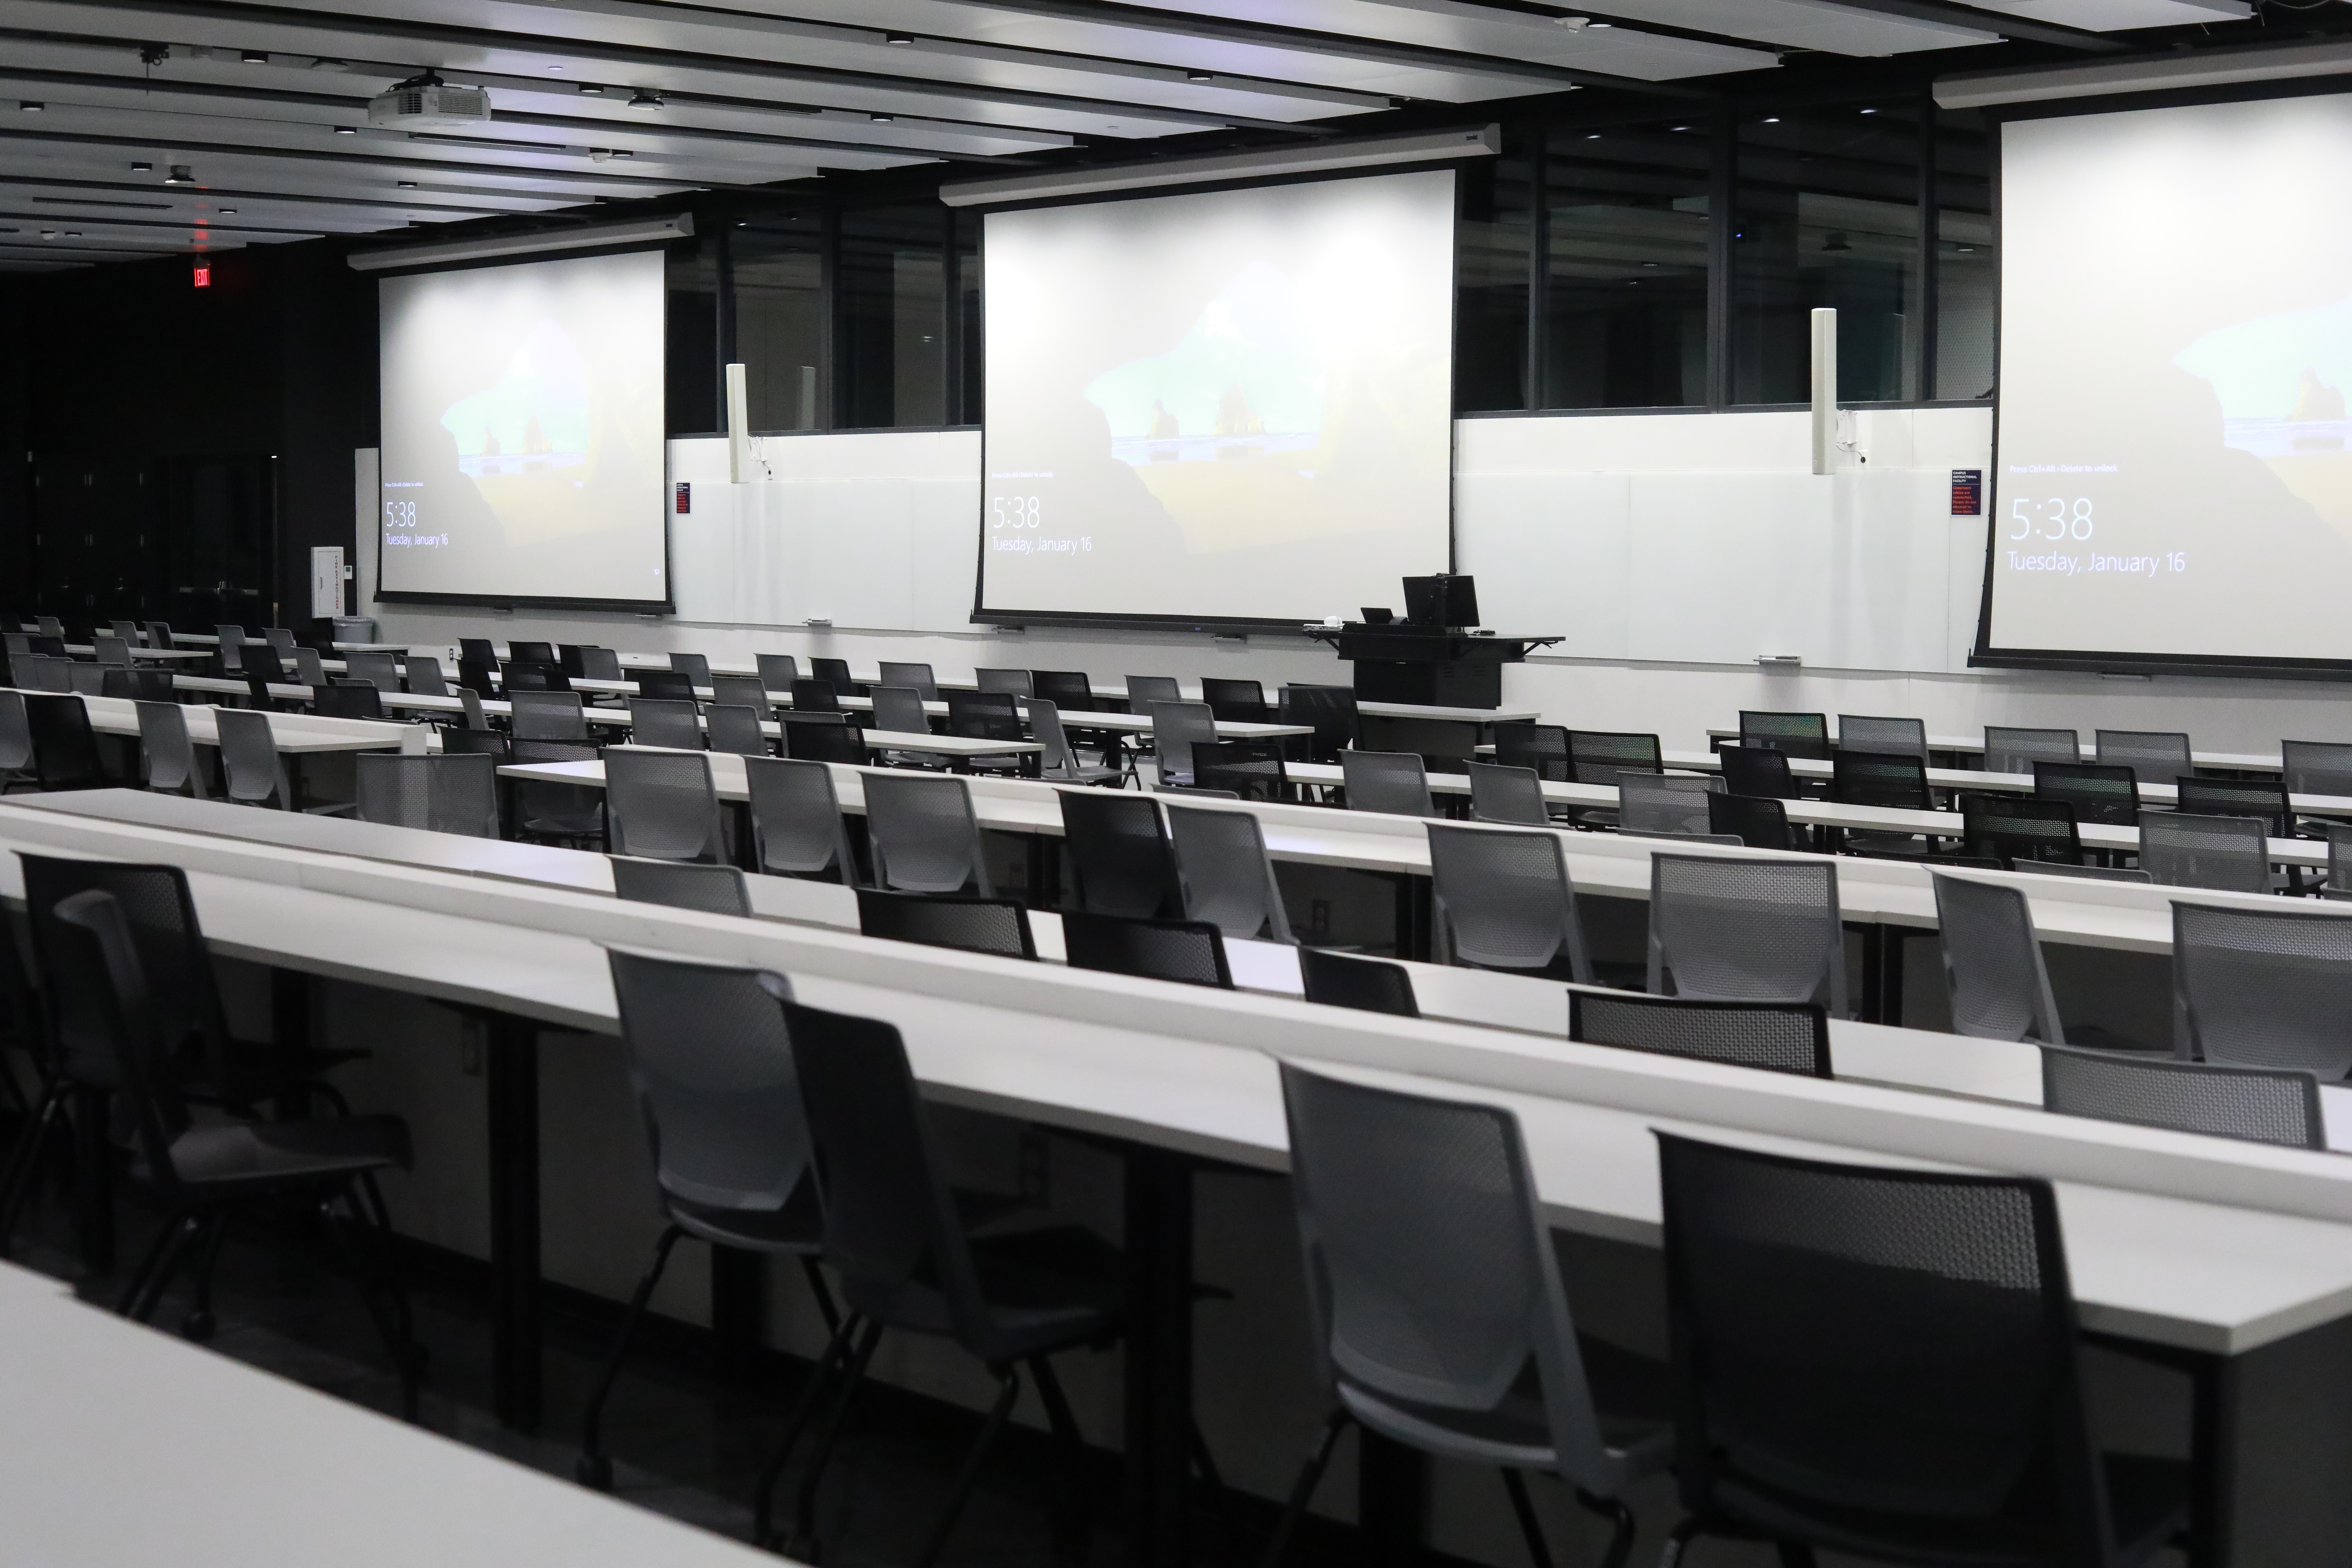 Classroom with front-facing tables and chairs and projector screens